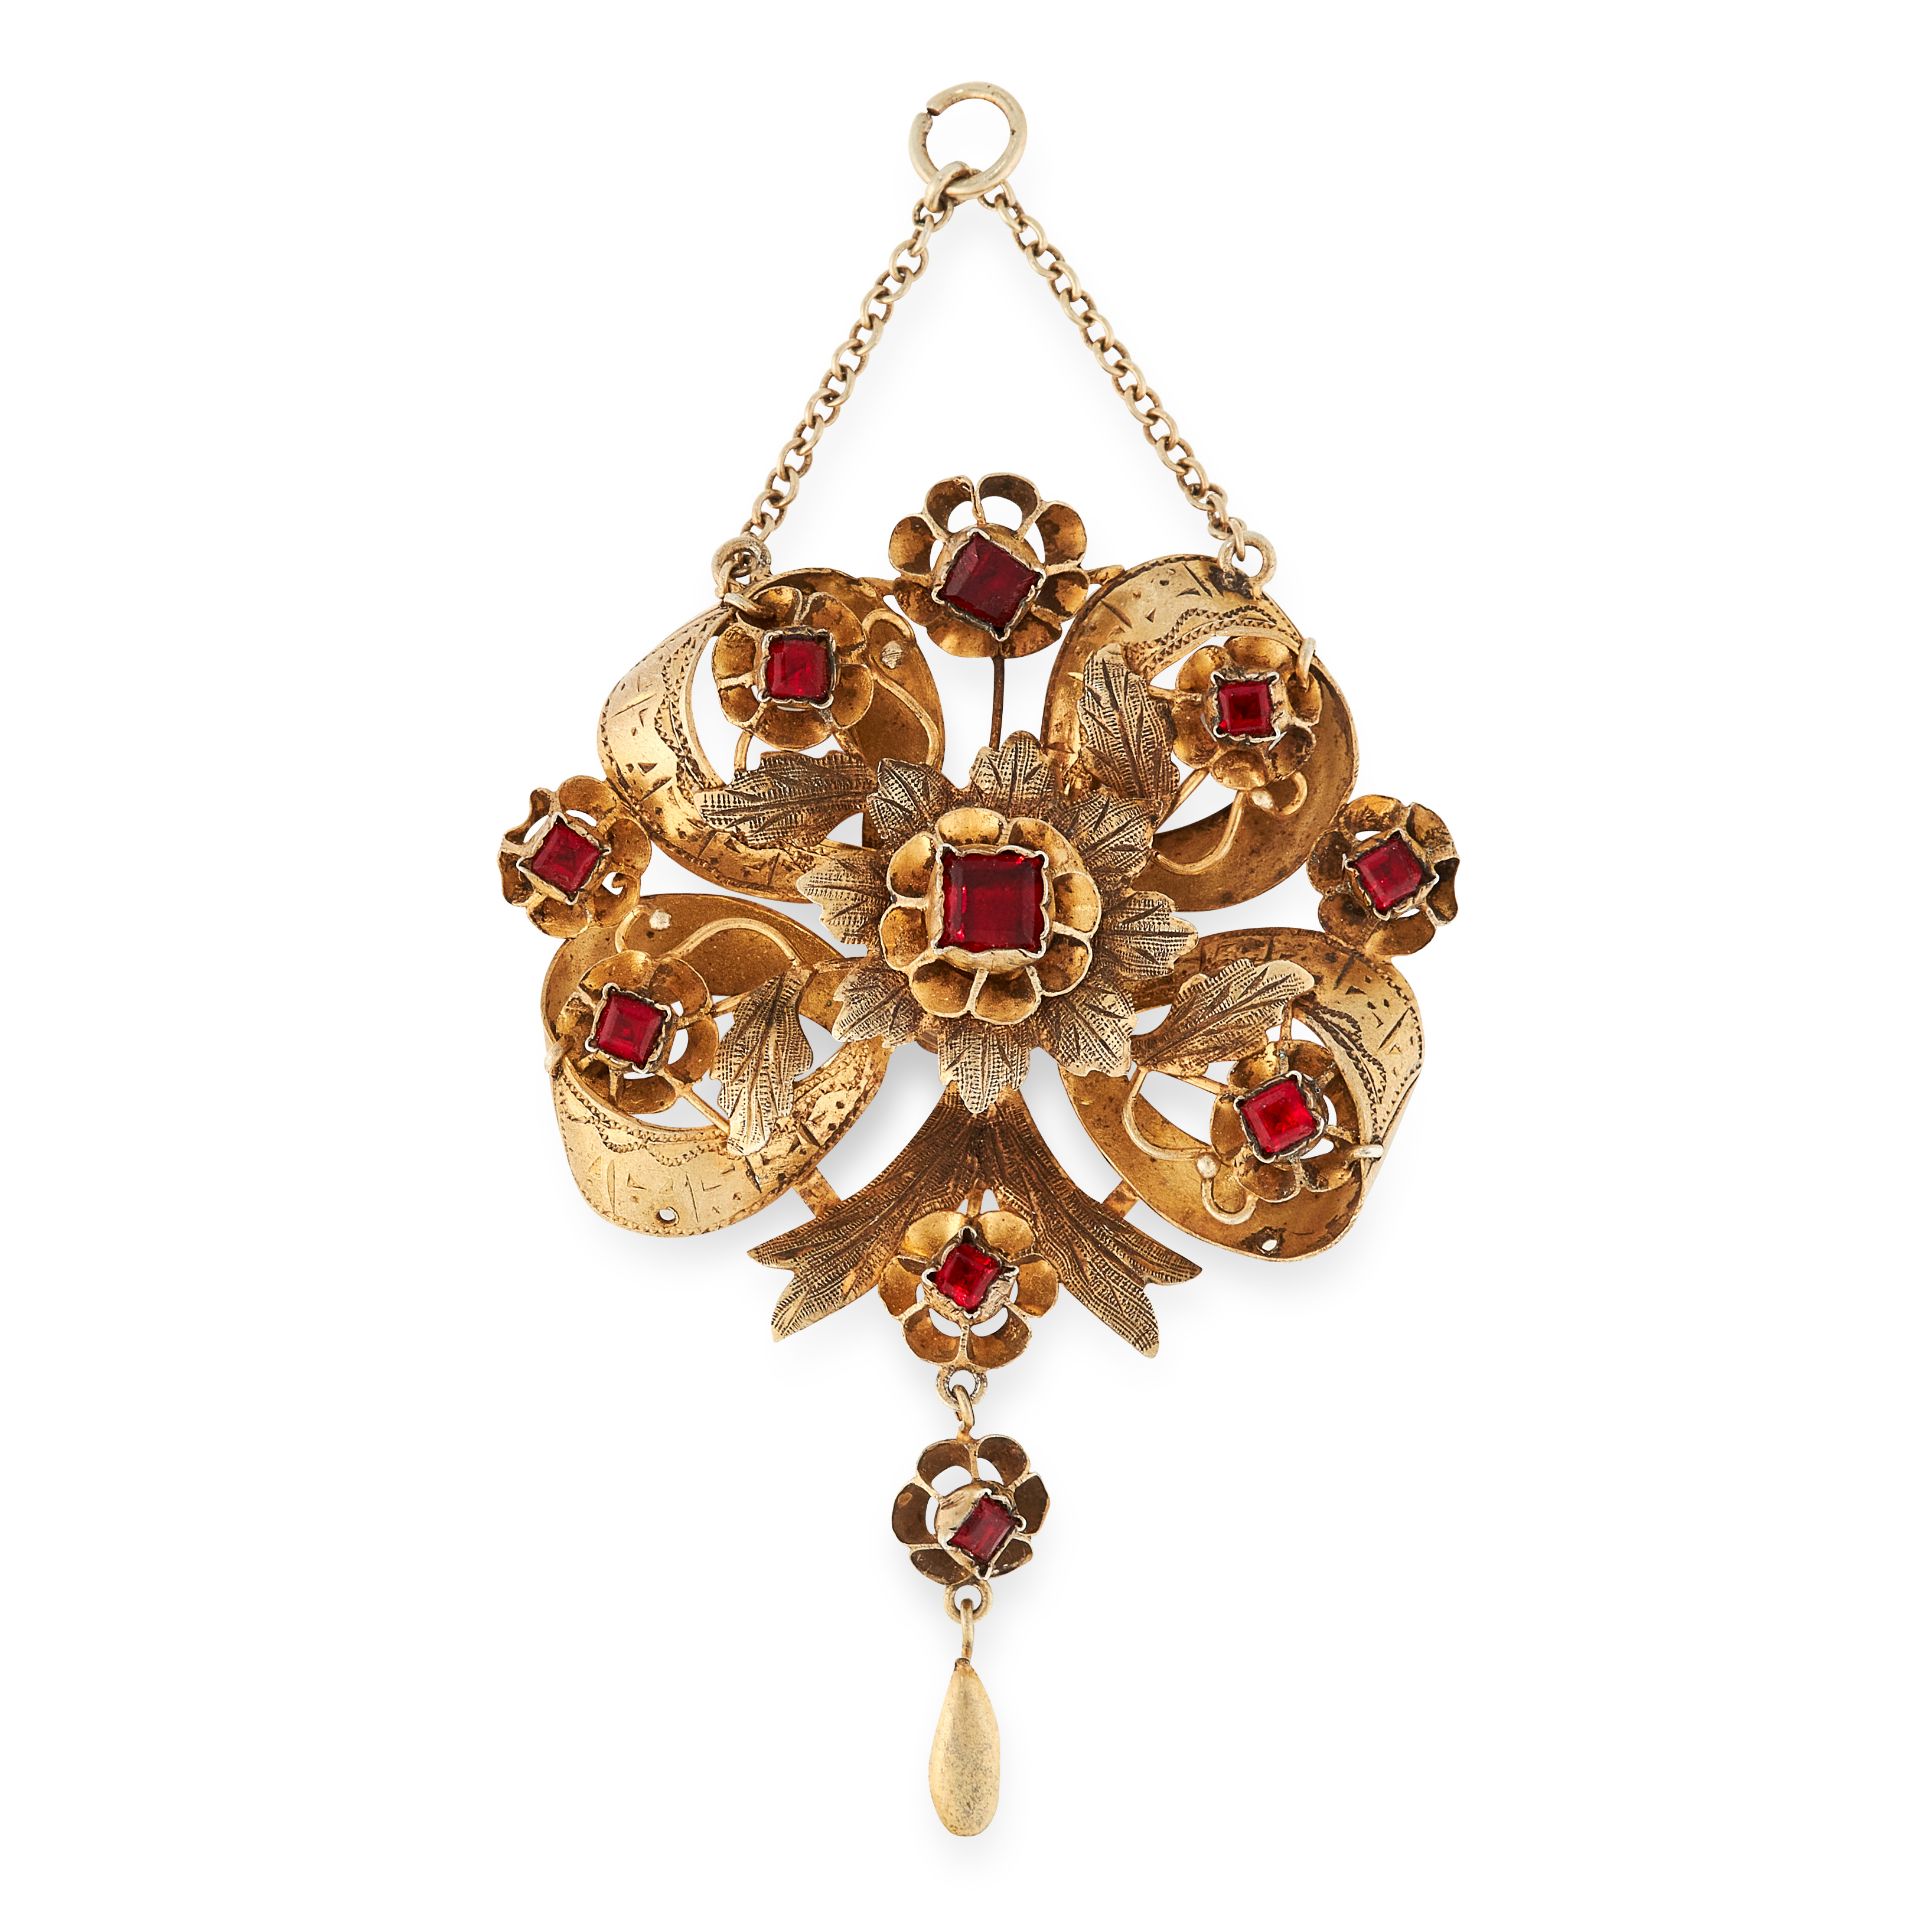 AN ANTIQUE RED PASTE PENDANT designed as a flower accented by foliage and scrolls, jewelled with